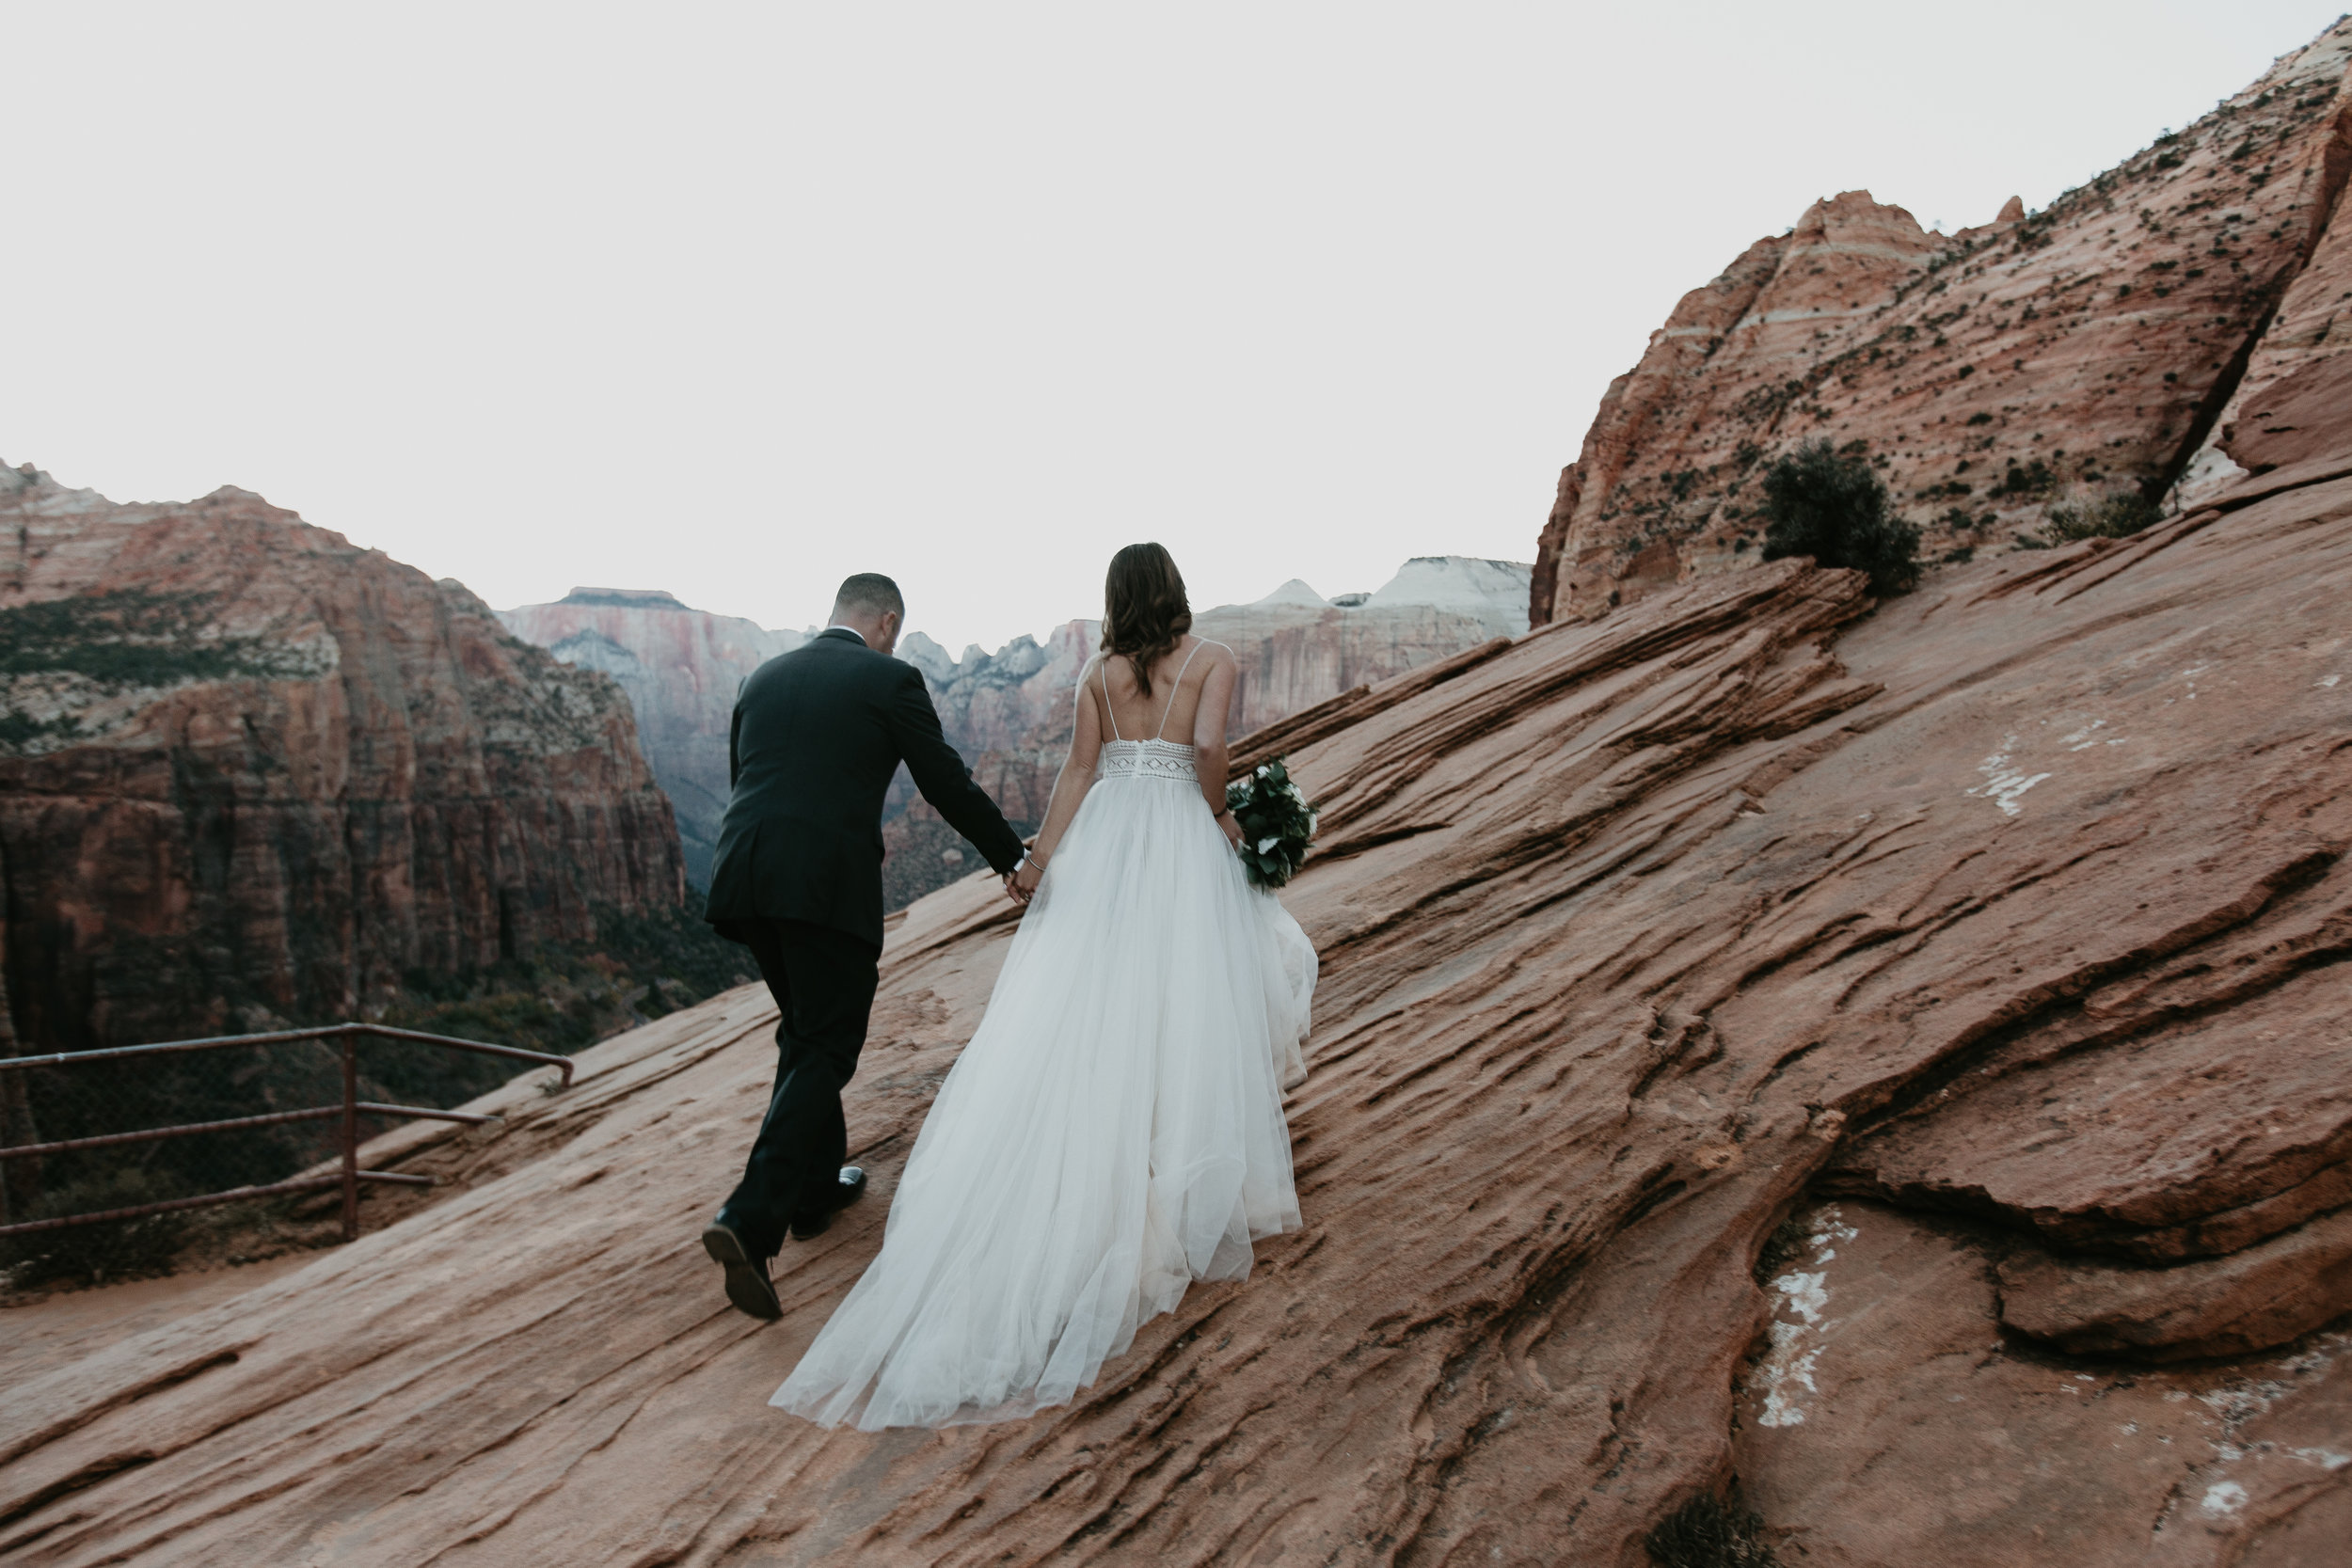 nicole-daacke-photography-zion-national-park-elopement-photographer-canyon-overlook-trail-elope-hiking-adventure-wedding-photos-fall-utah-red-rock-canyon-stgeorge-eloping-photographer-75.jpg